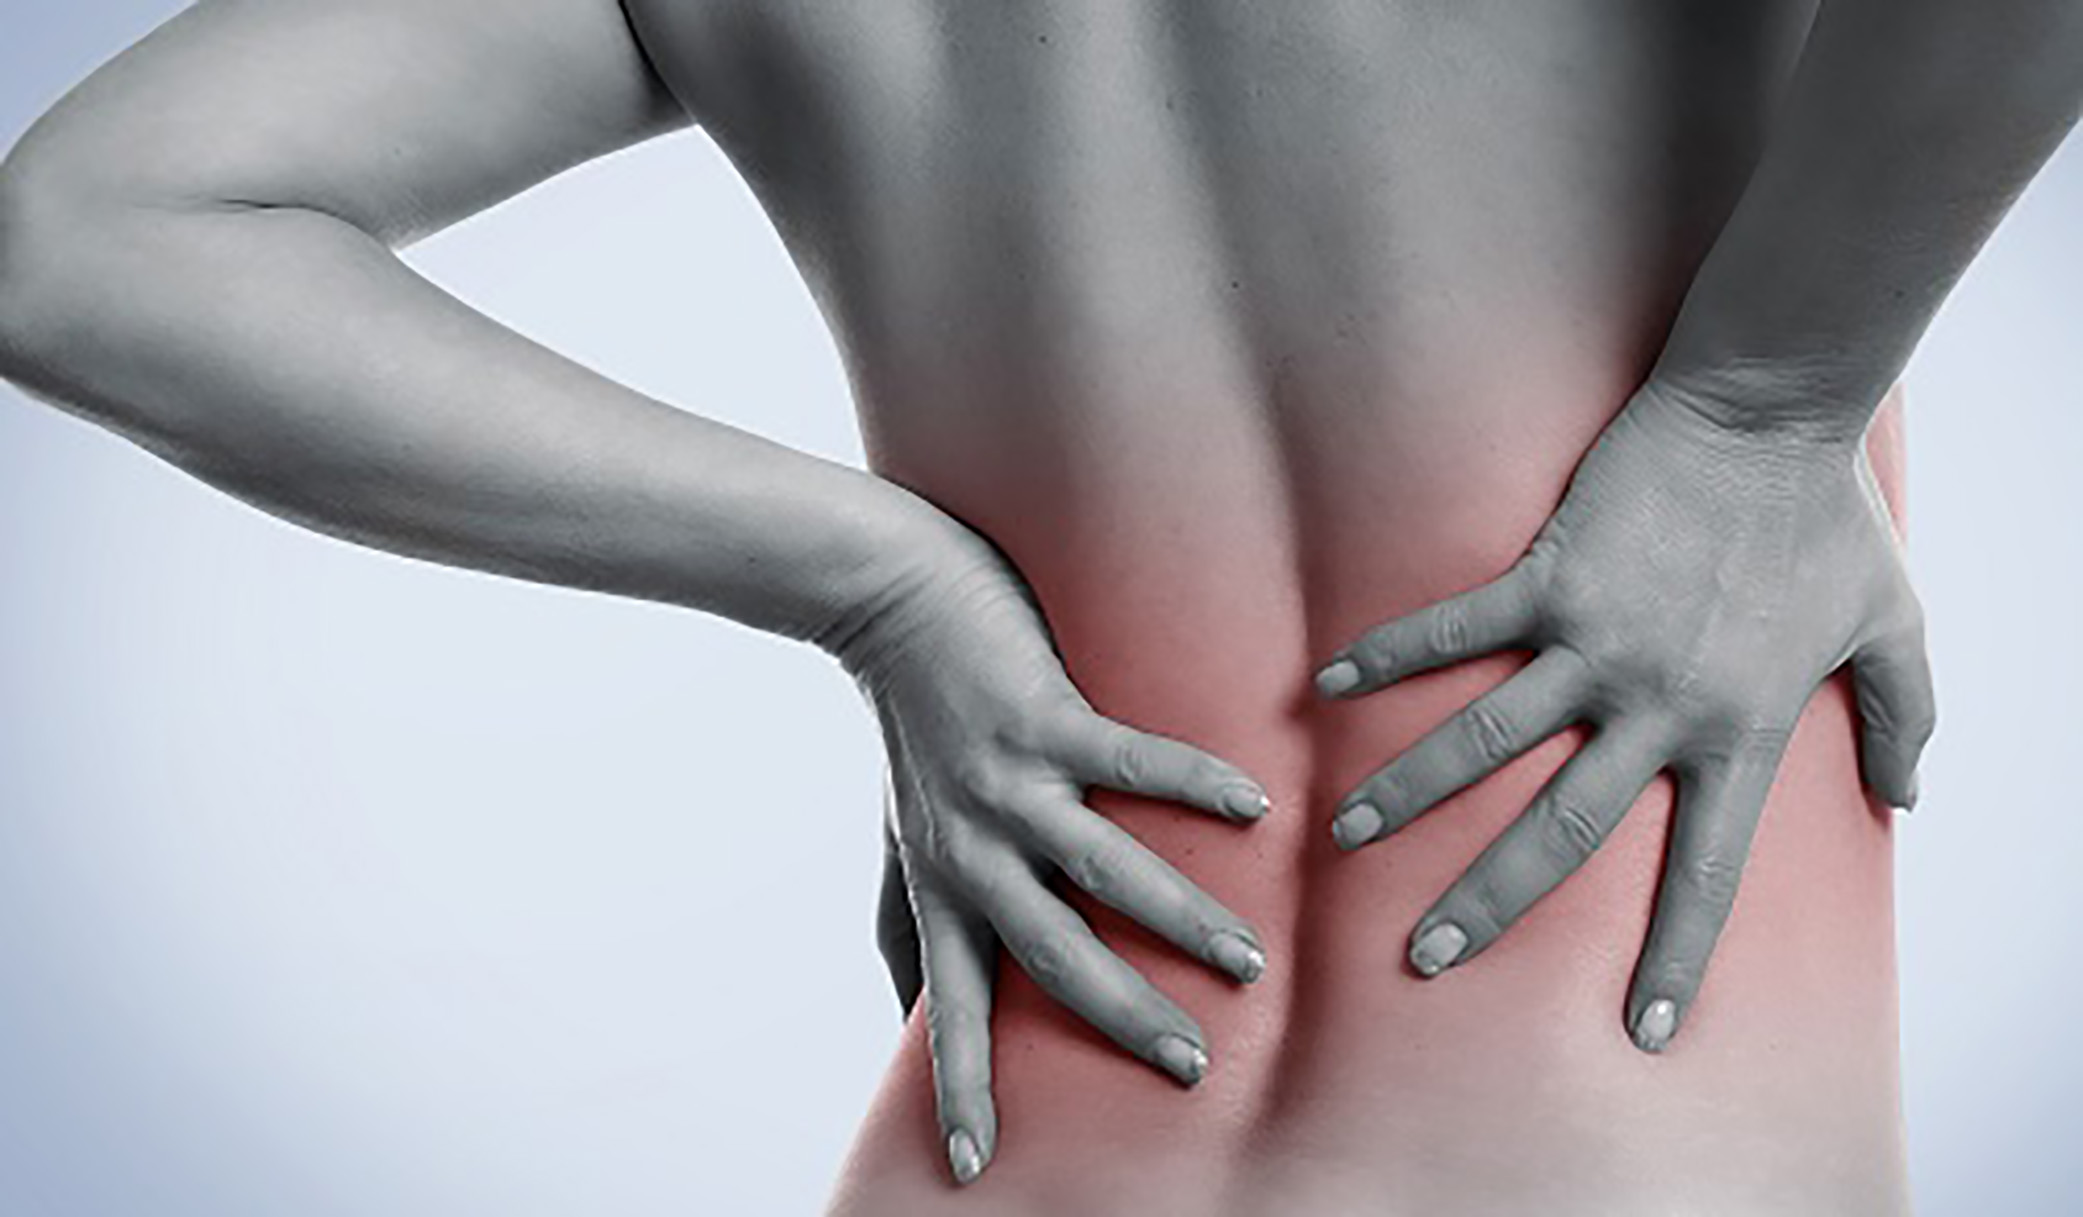 Learn More About Chronic Back Pain From Dr. Karl Jawhari